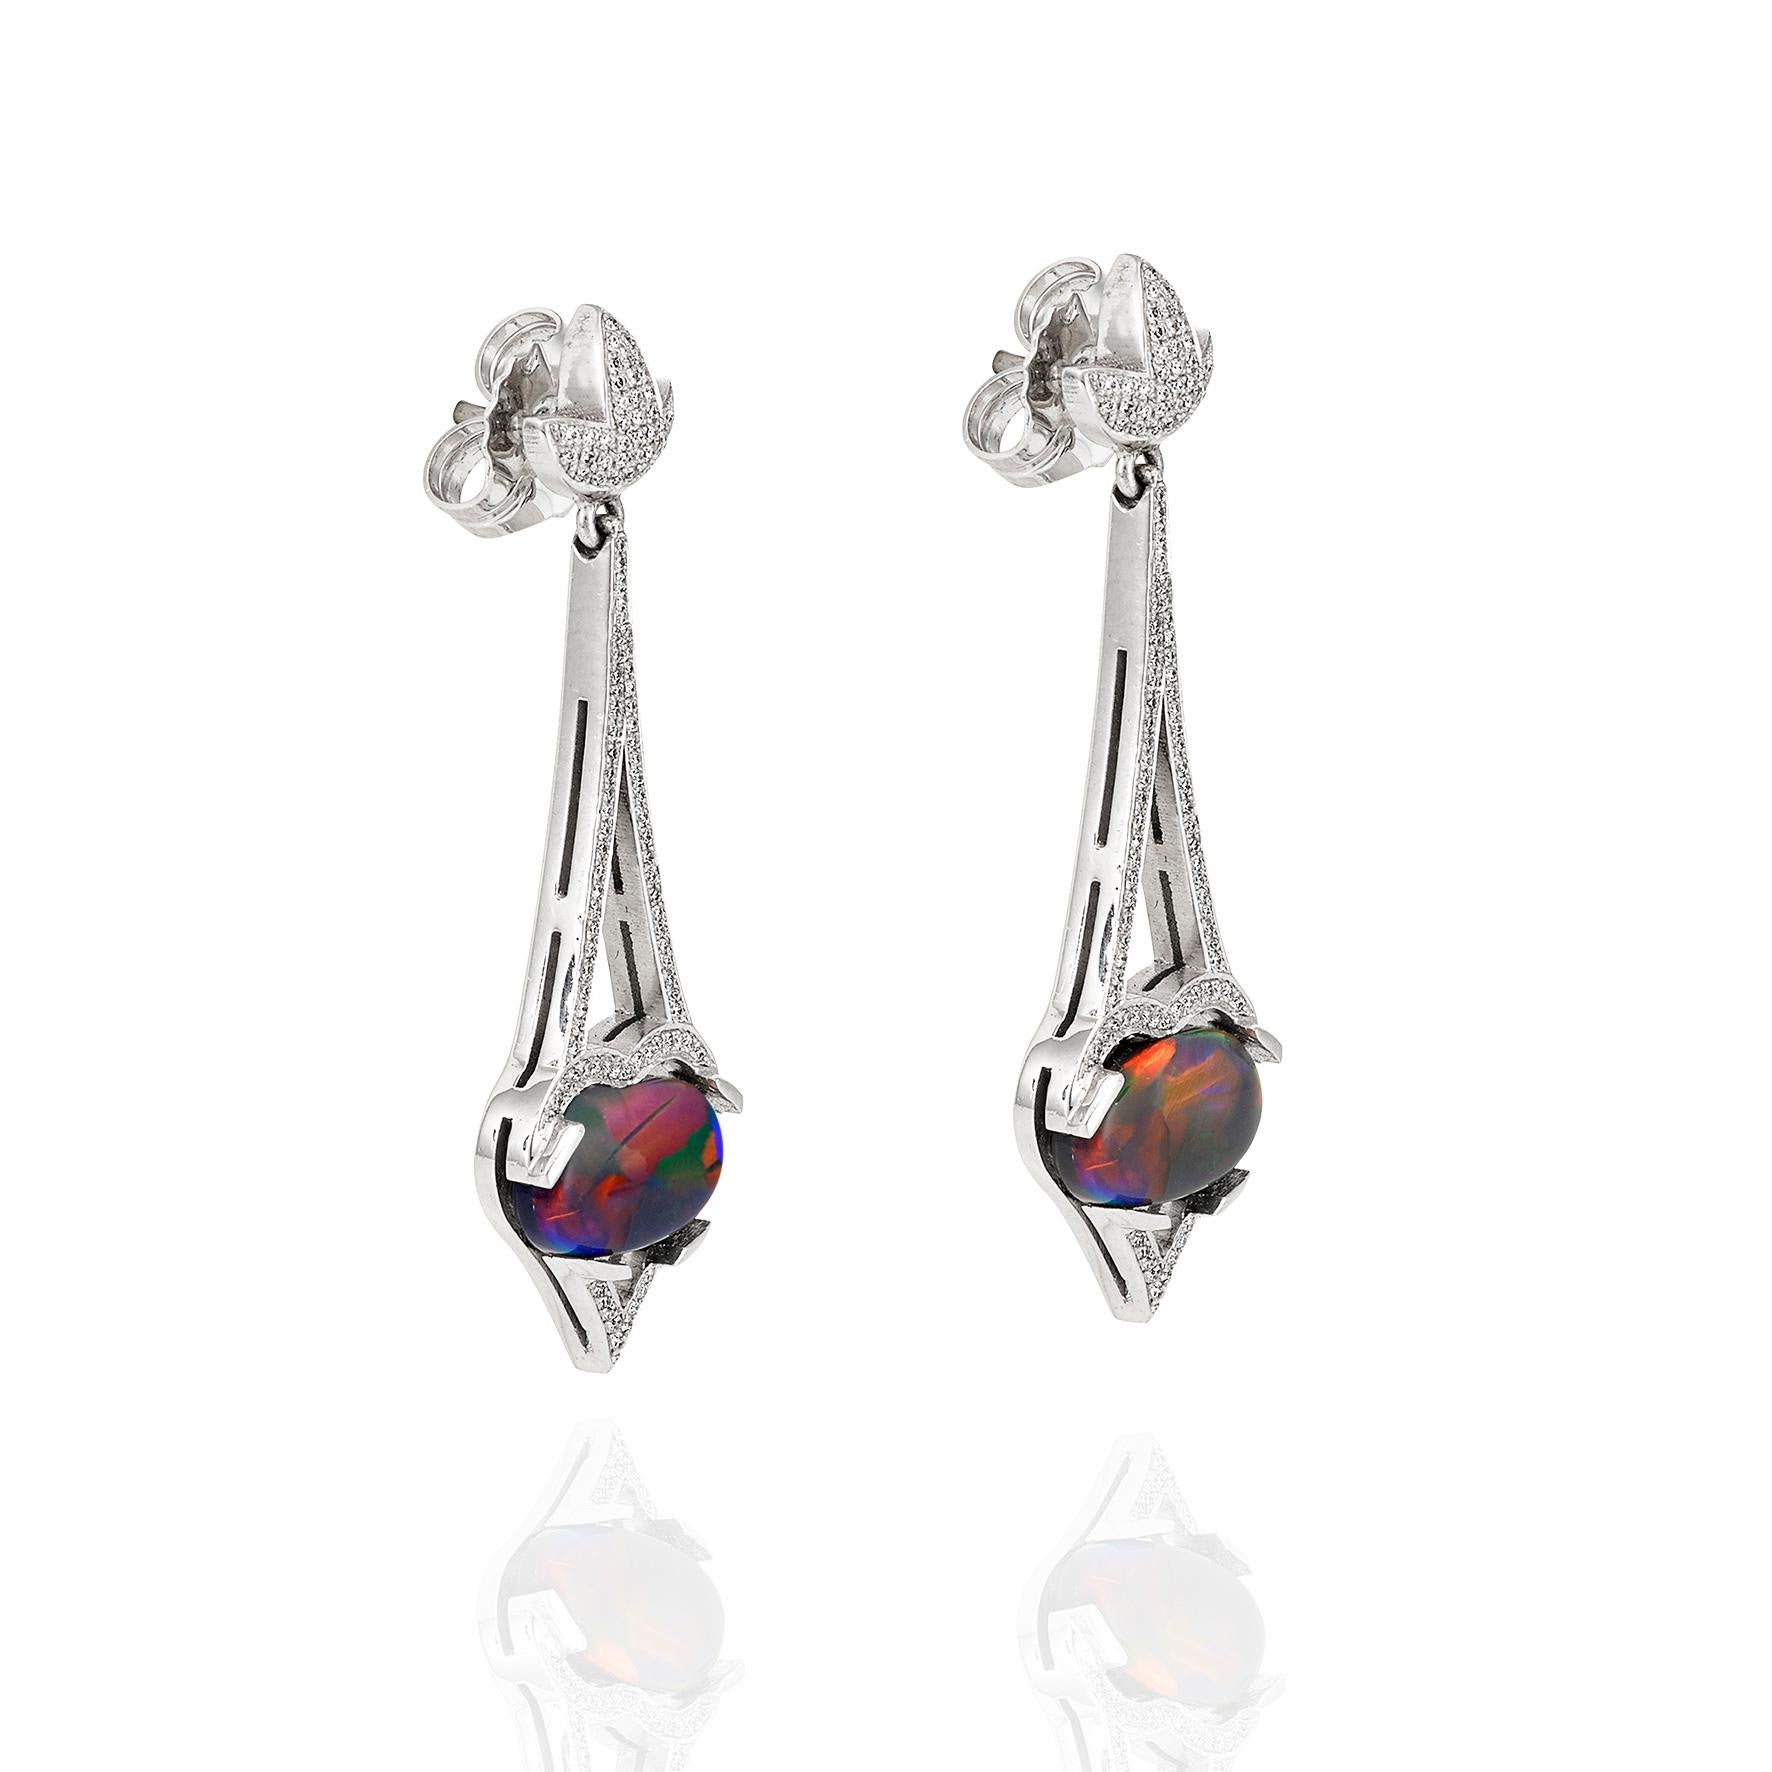 Giulians 18 karat white gold Art Deco inspired black opal and diamond drop earrings.  These earrings feature two oval cabochon, natural, solid Australian opals from Lightning Ridge, NSW (total weight 2=3.70ct).  The opals display deep blue, green